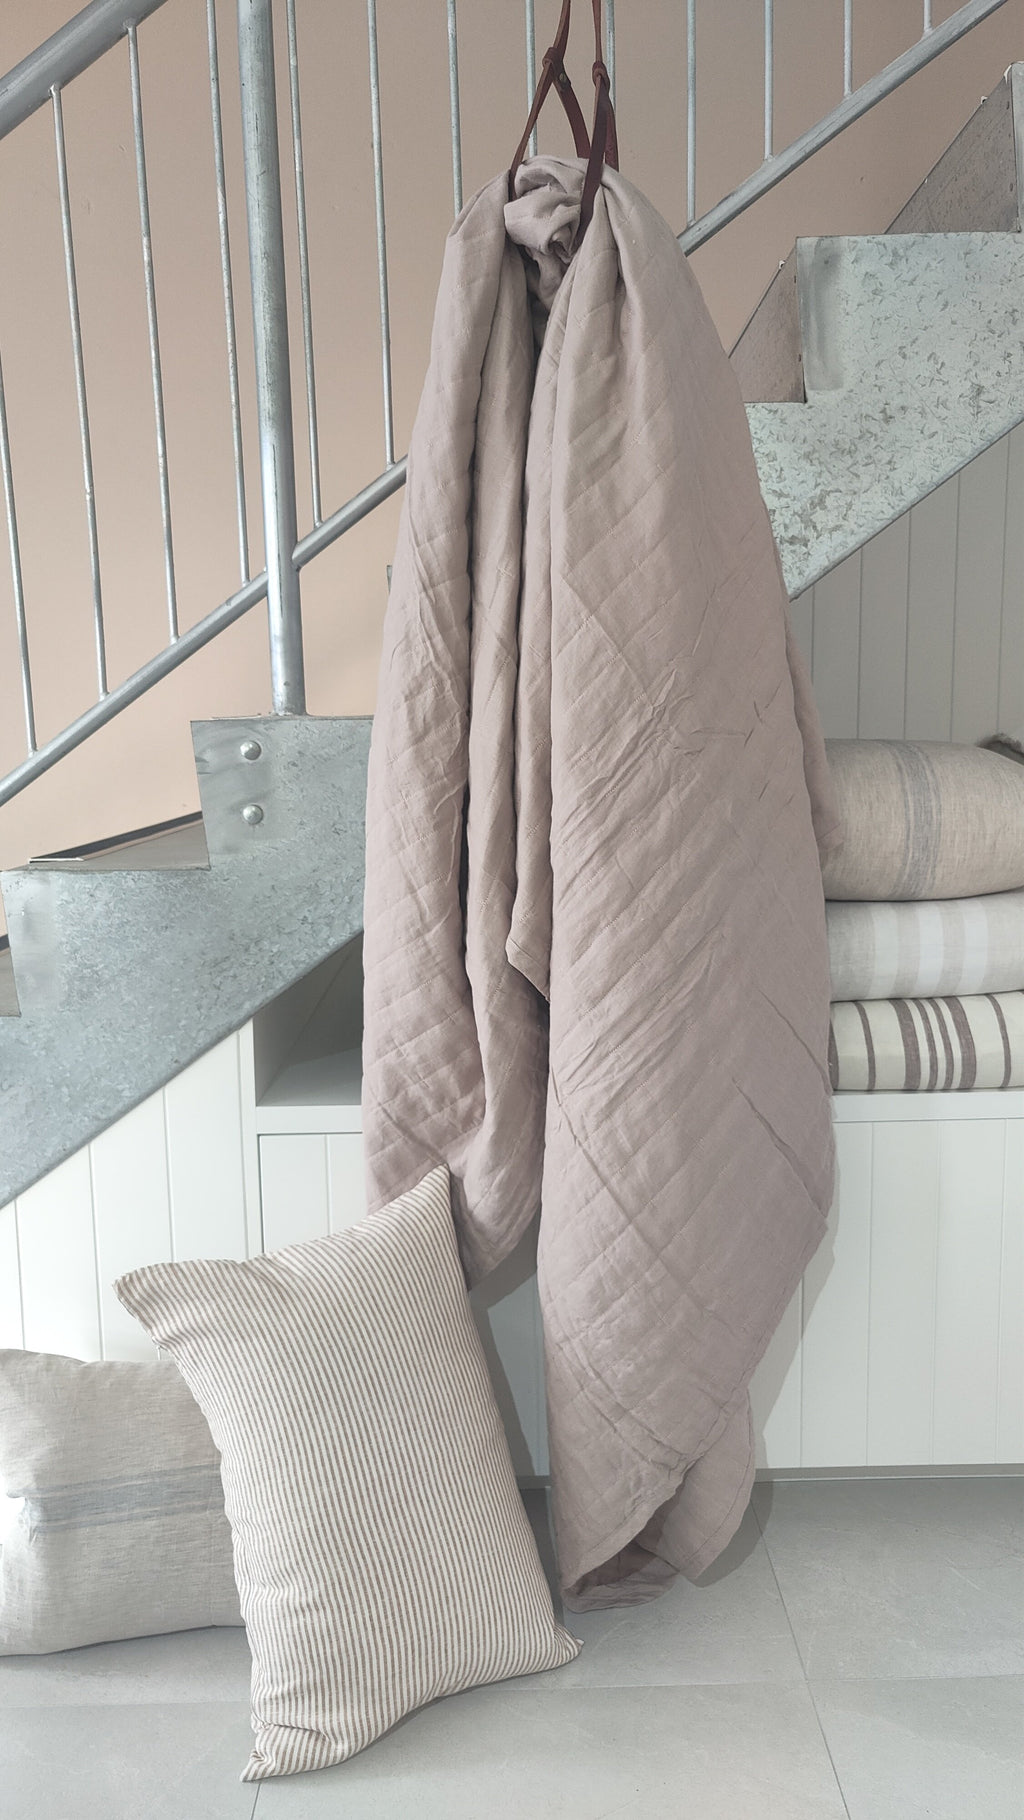 100% pure french linen bedspread, pink bedspread, pure linen pink bedspread, pure linen bedspread, pink linen bedspread, Interior Collections, bedspread